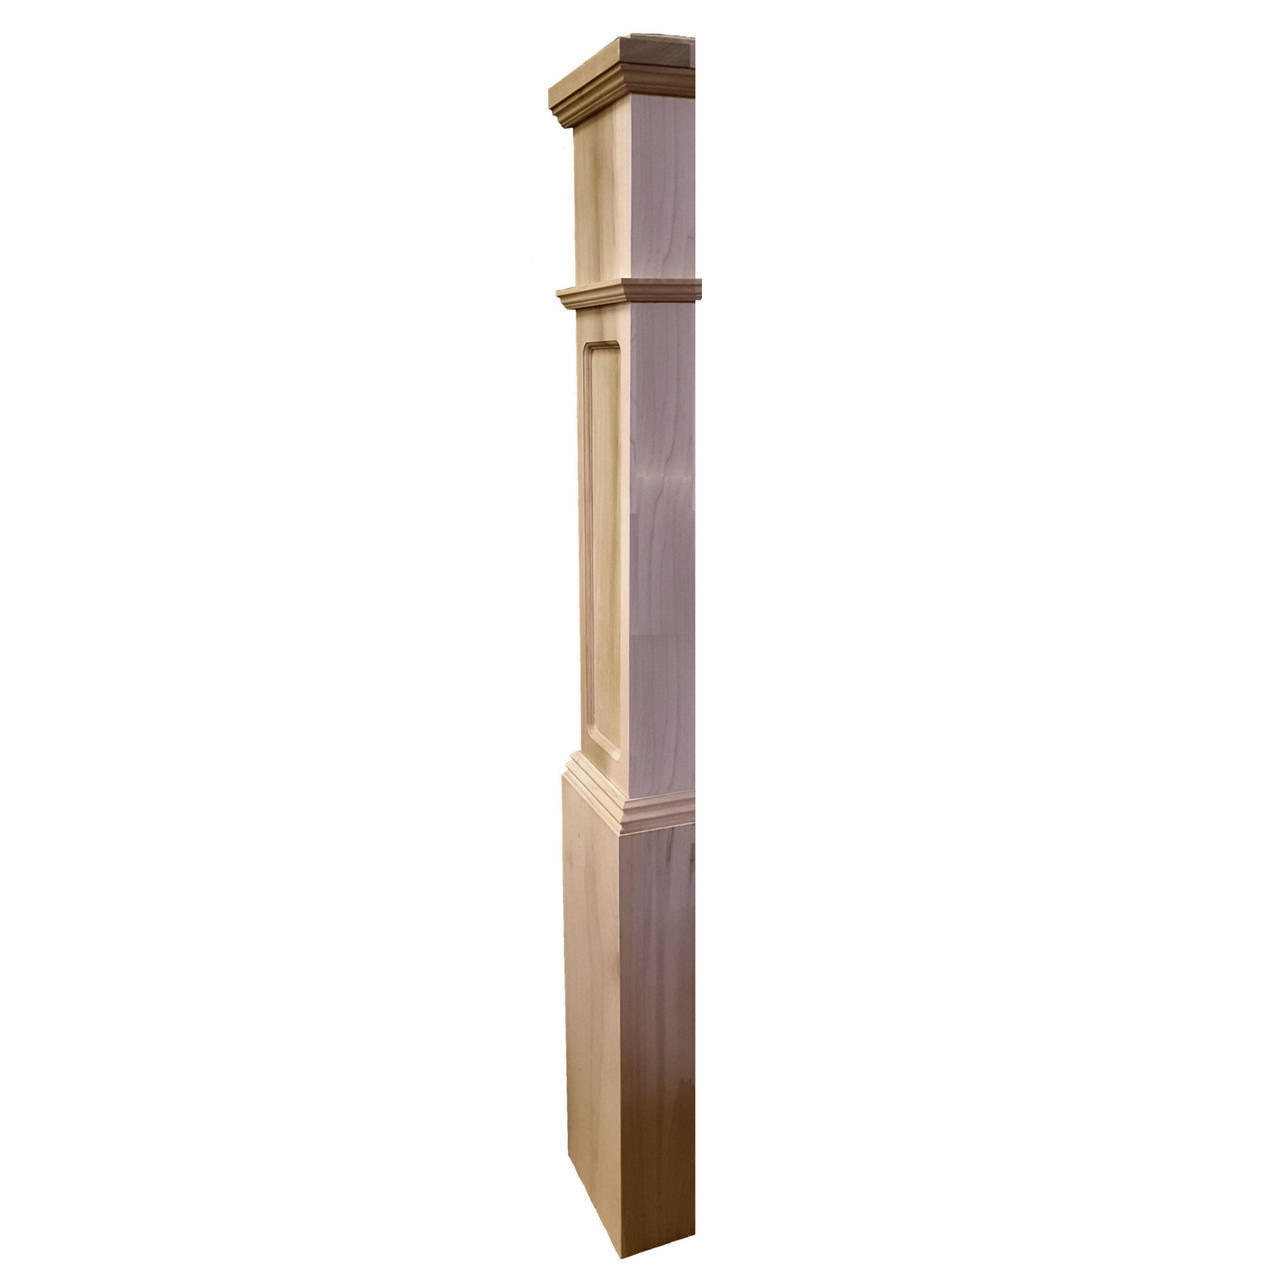 Fp 4092 Primed With Special Species Trim Flat Panel Box Newel Post